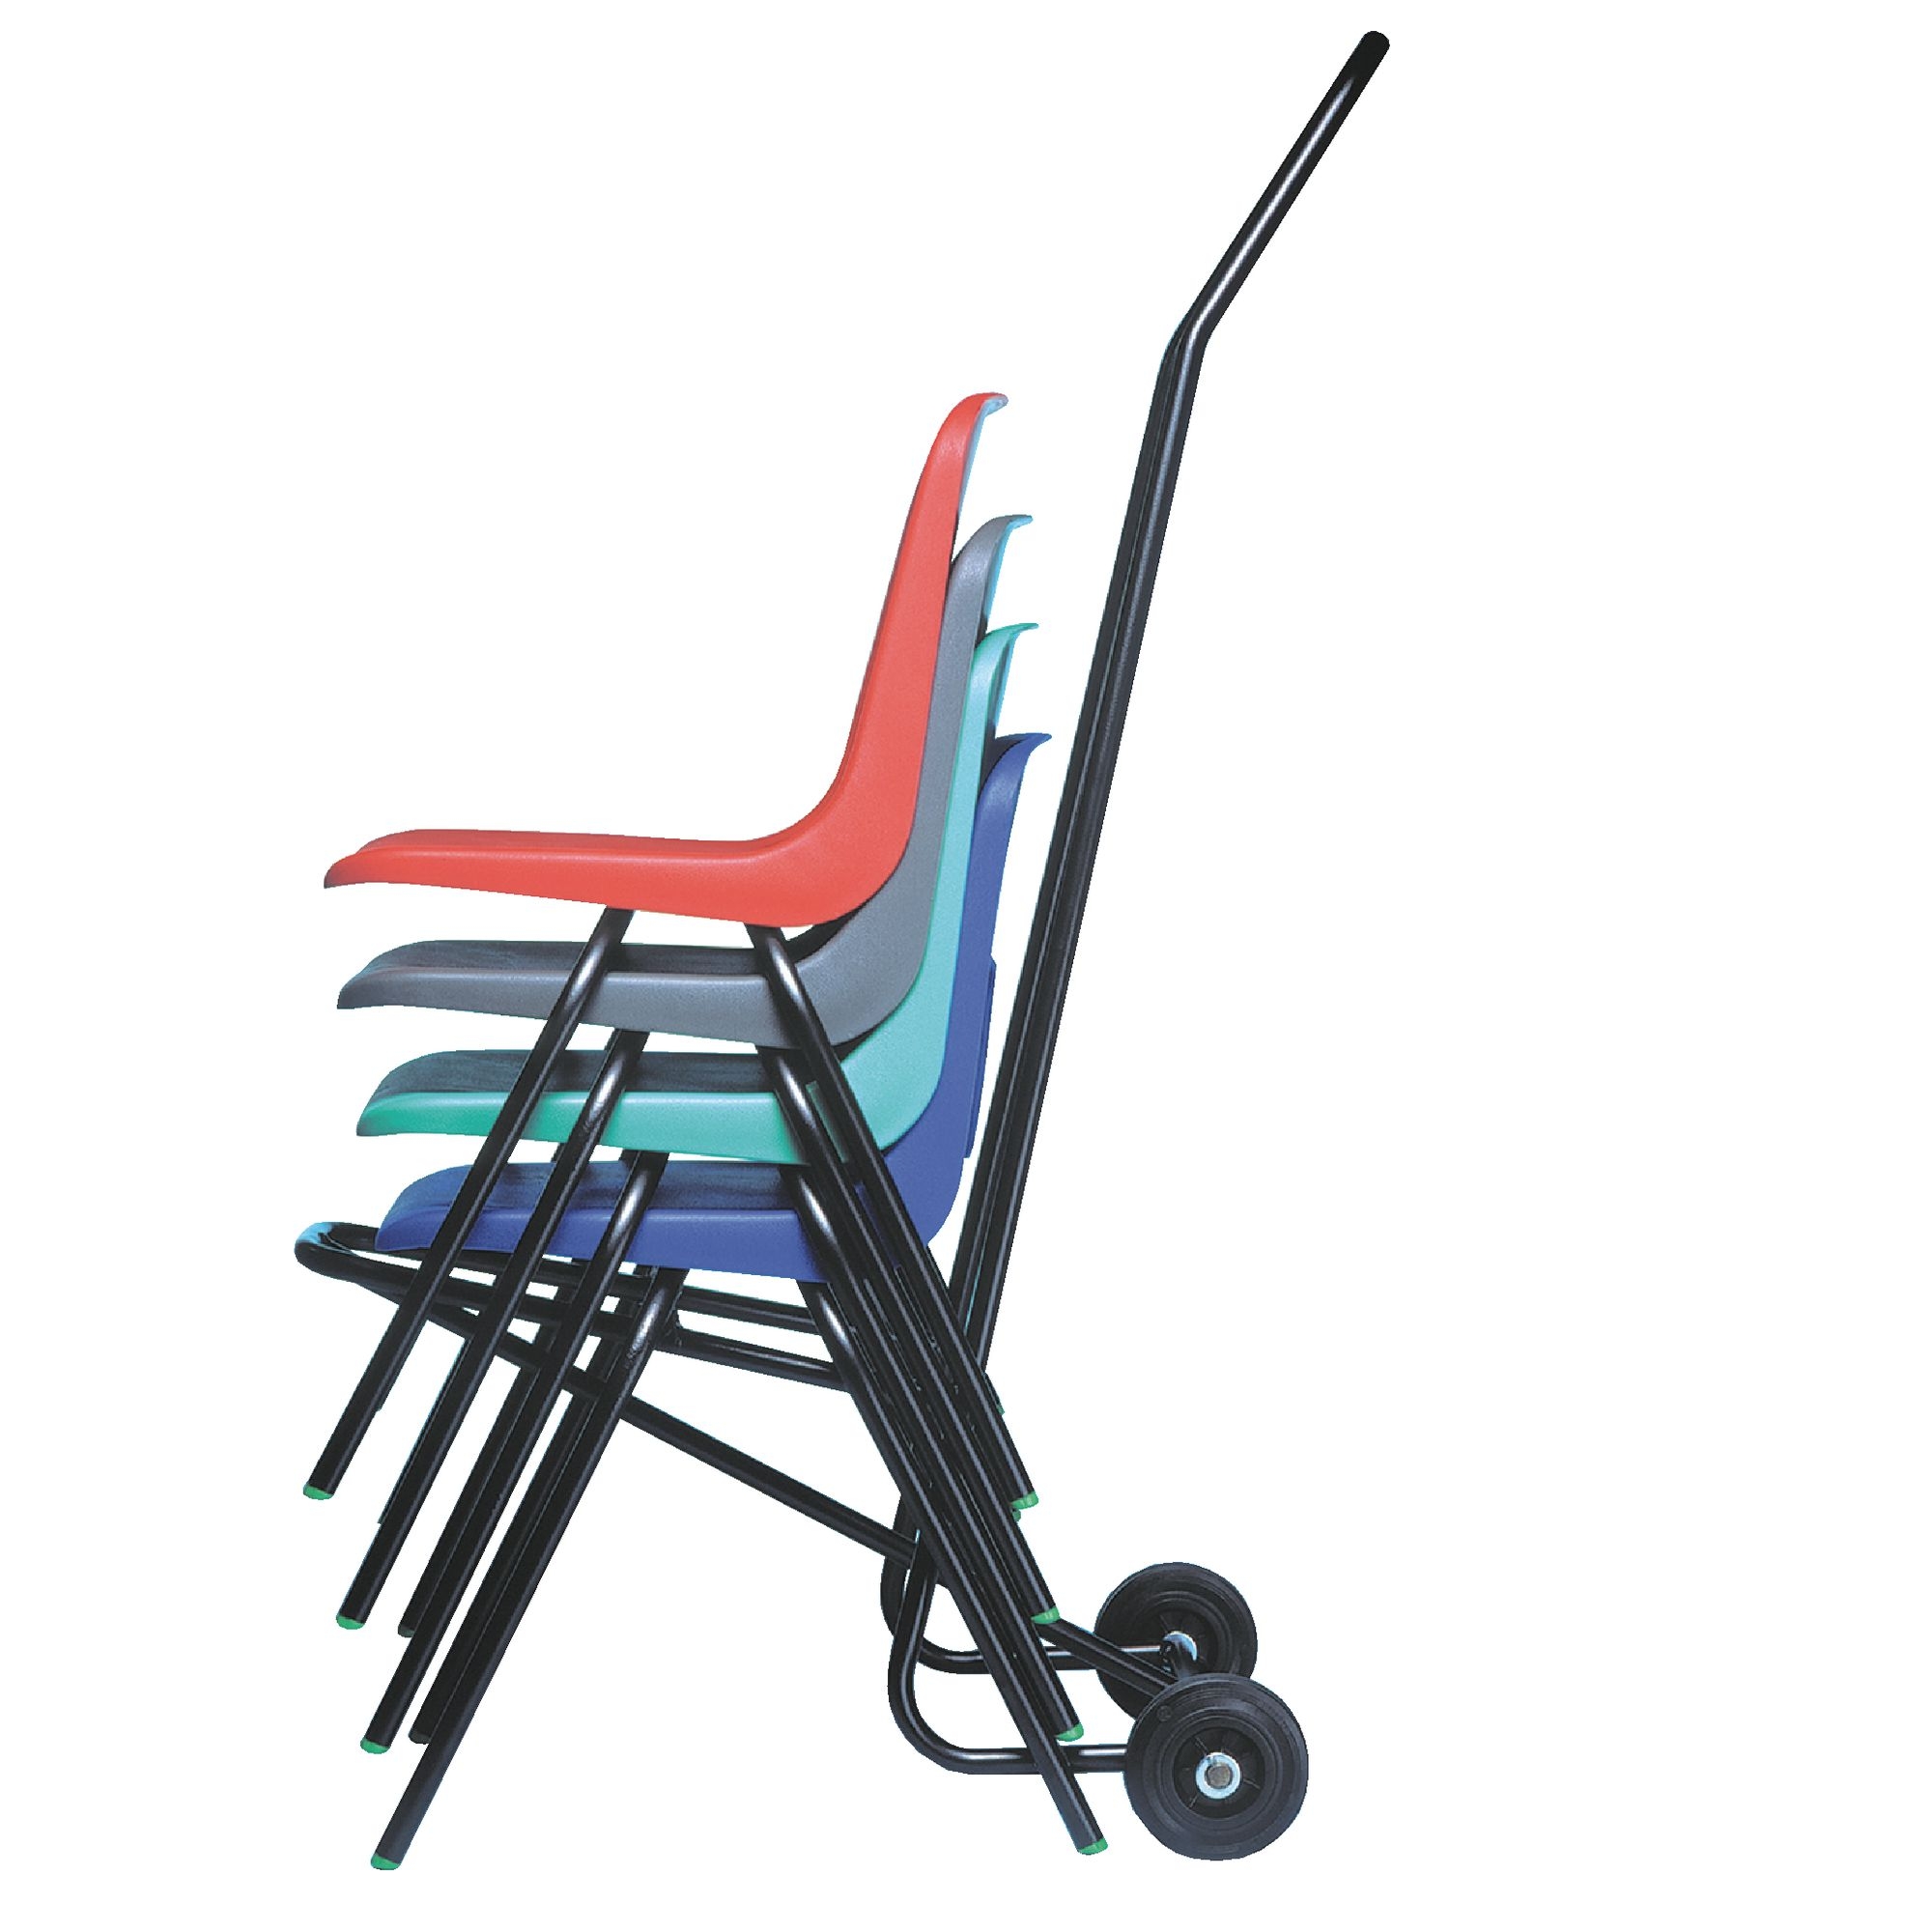 Chair transporter for SE and Series 'E' chair. Lifts and transports all sizes.